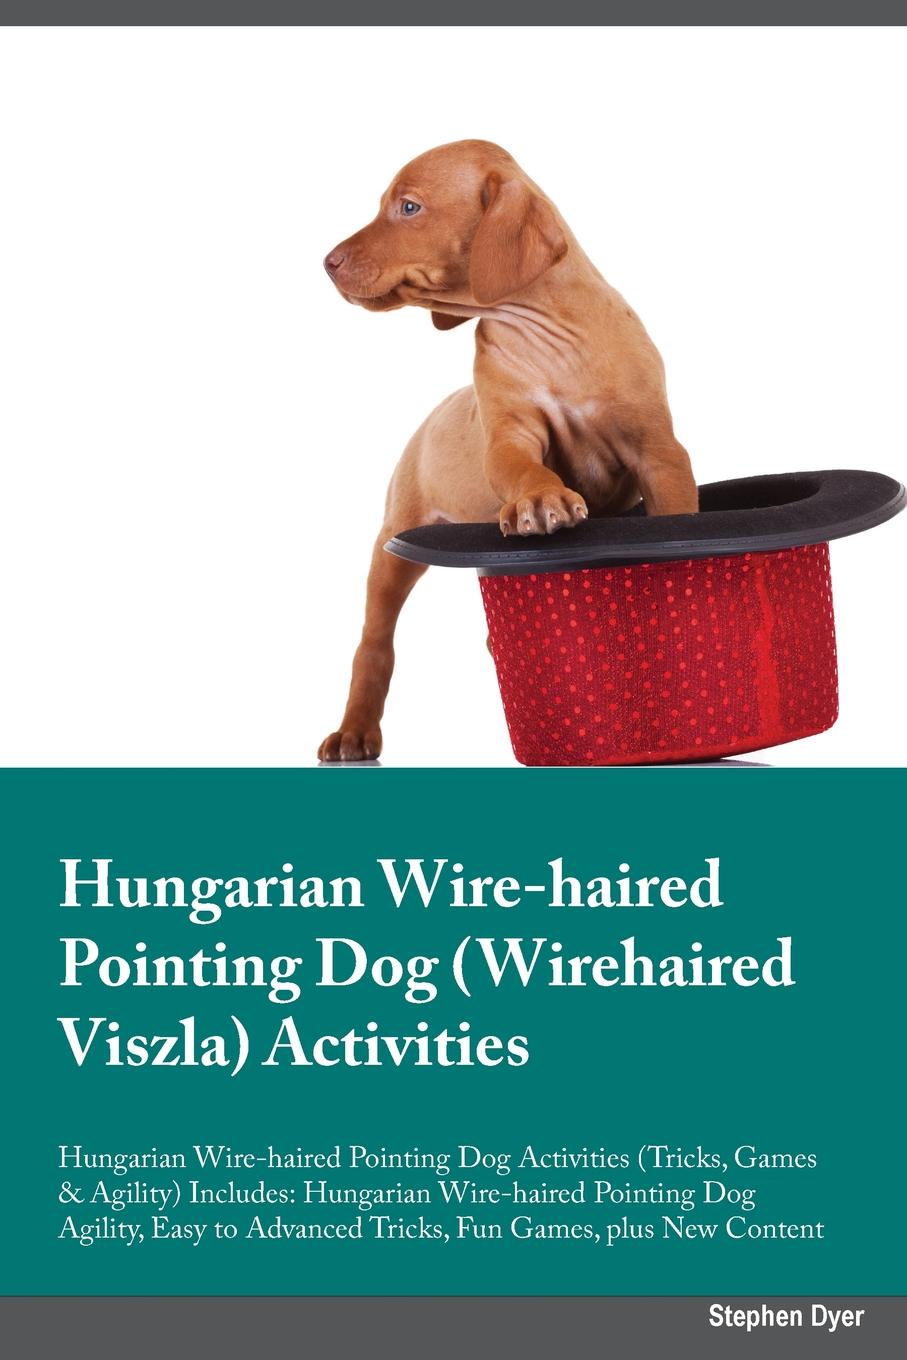 Hungarian Wire-haired Pointing Dog Wirehaired Viszla Activities Hungarian Wire-haired Pointing Dog Activities (Tricks, Games & Agility) Includes. Hungarian Wire-haired Pointing Dog Agility, Easy to Advanced Tricks, Fun Games, plus New Content